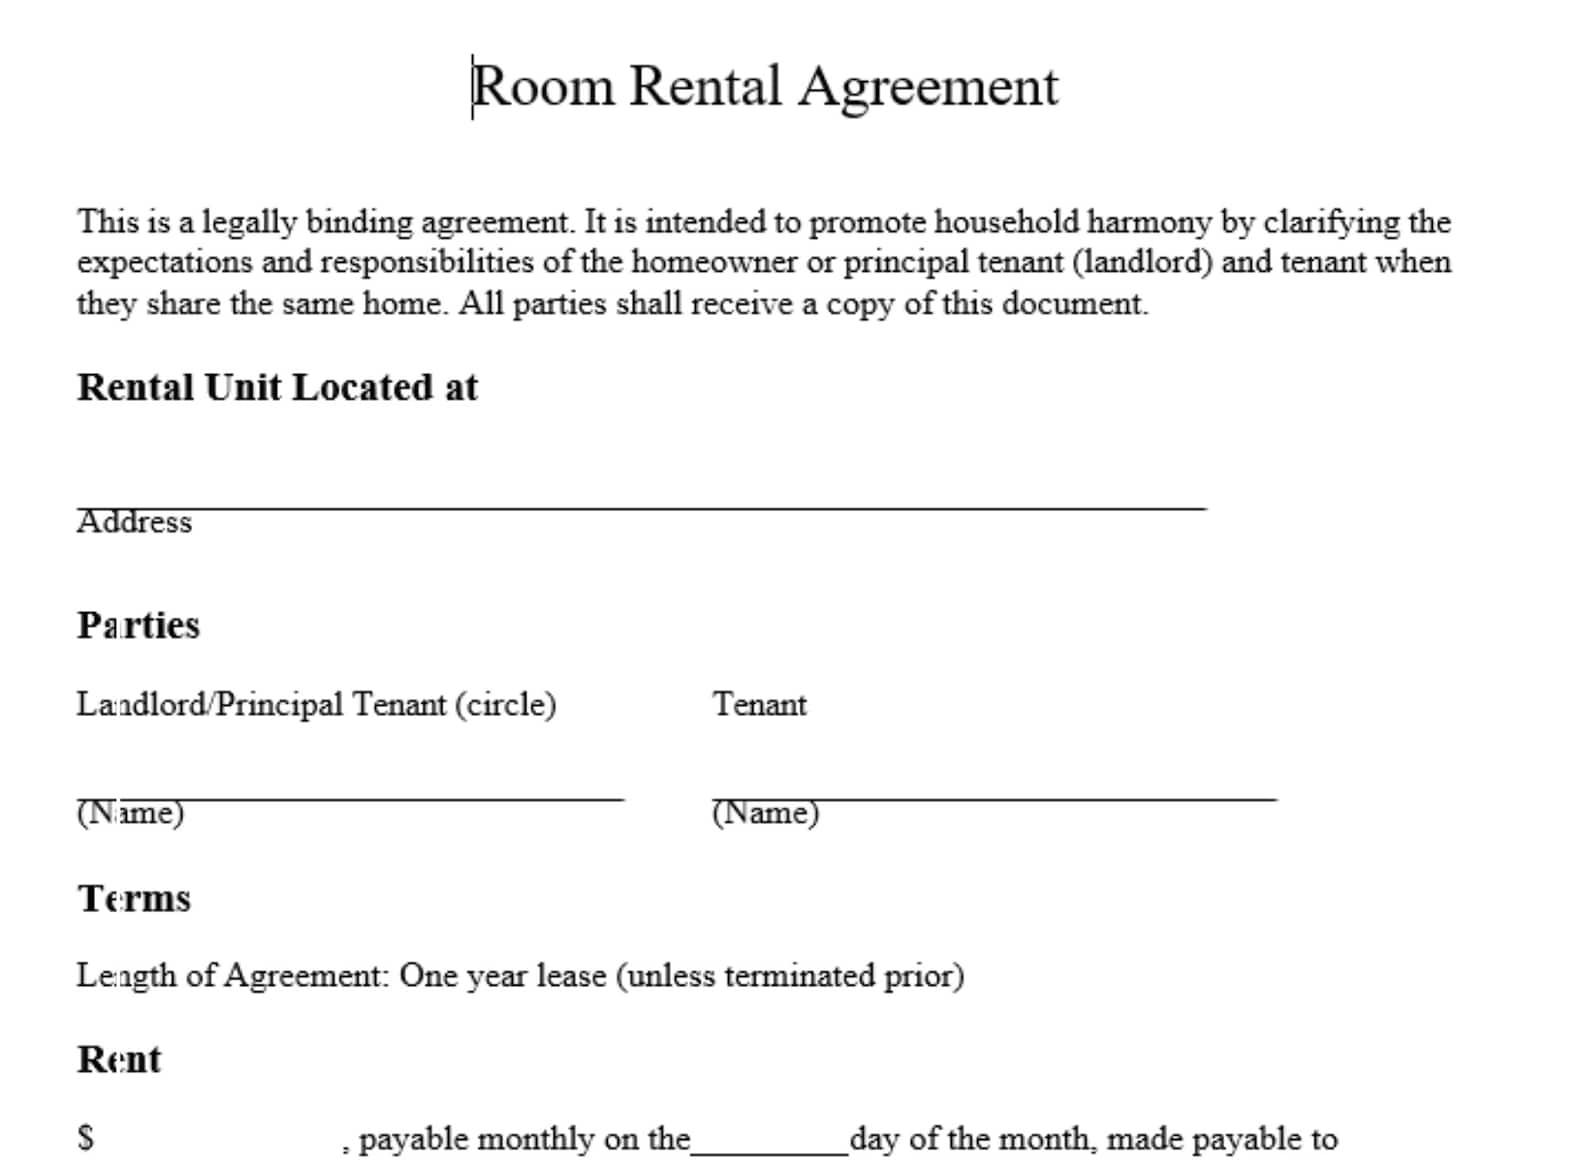 room-rental-agreement-editable-rental-agreement-simple-lease-contract